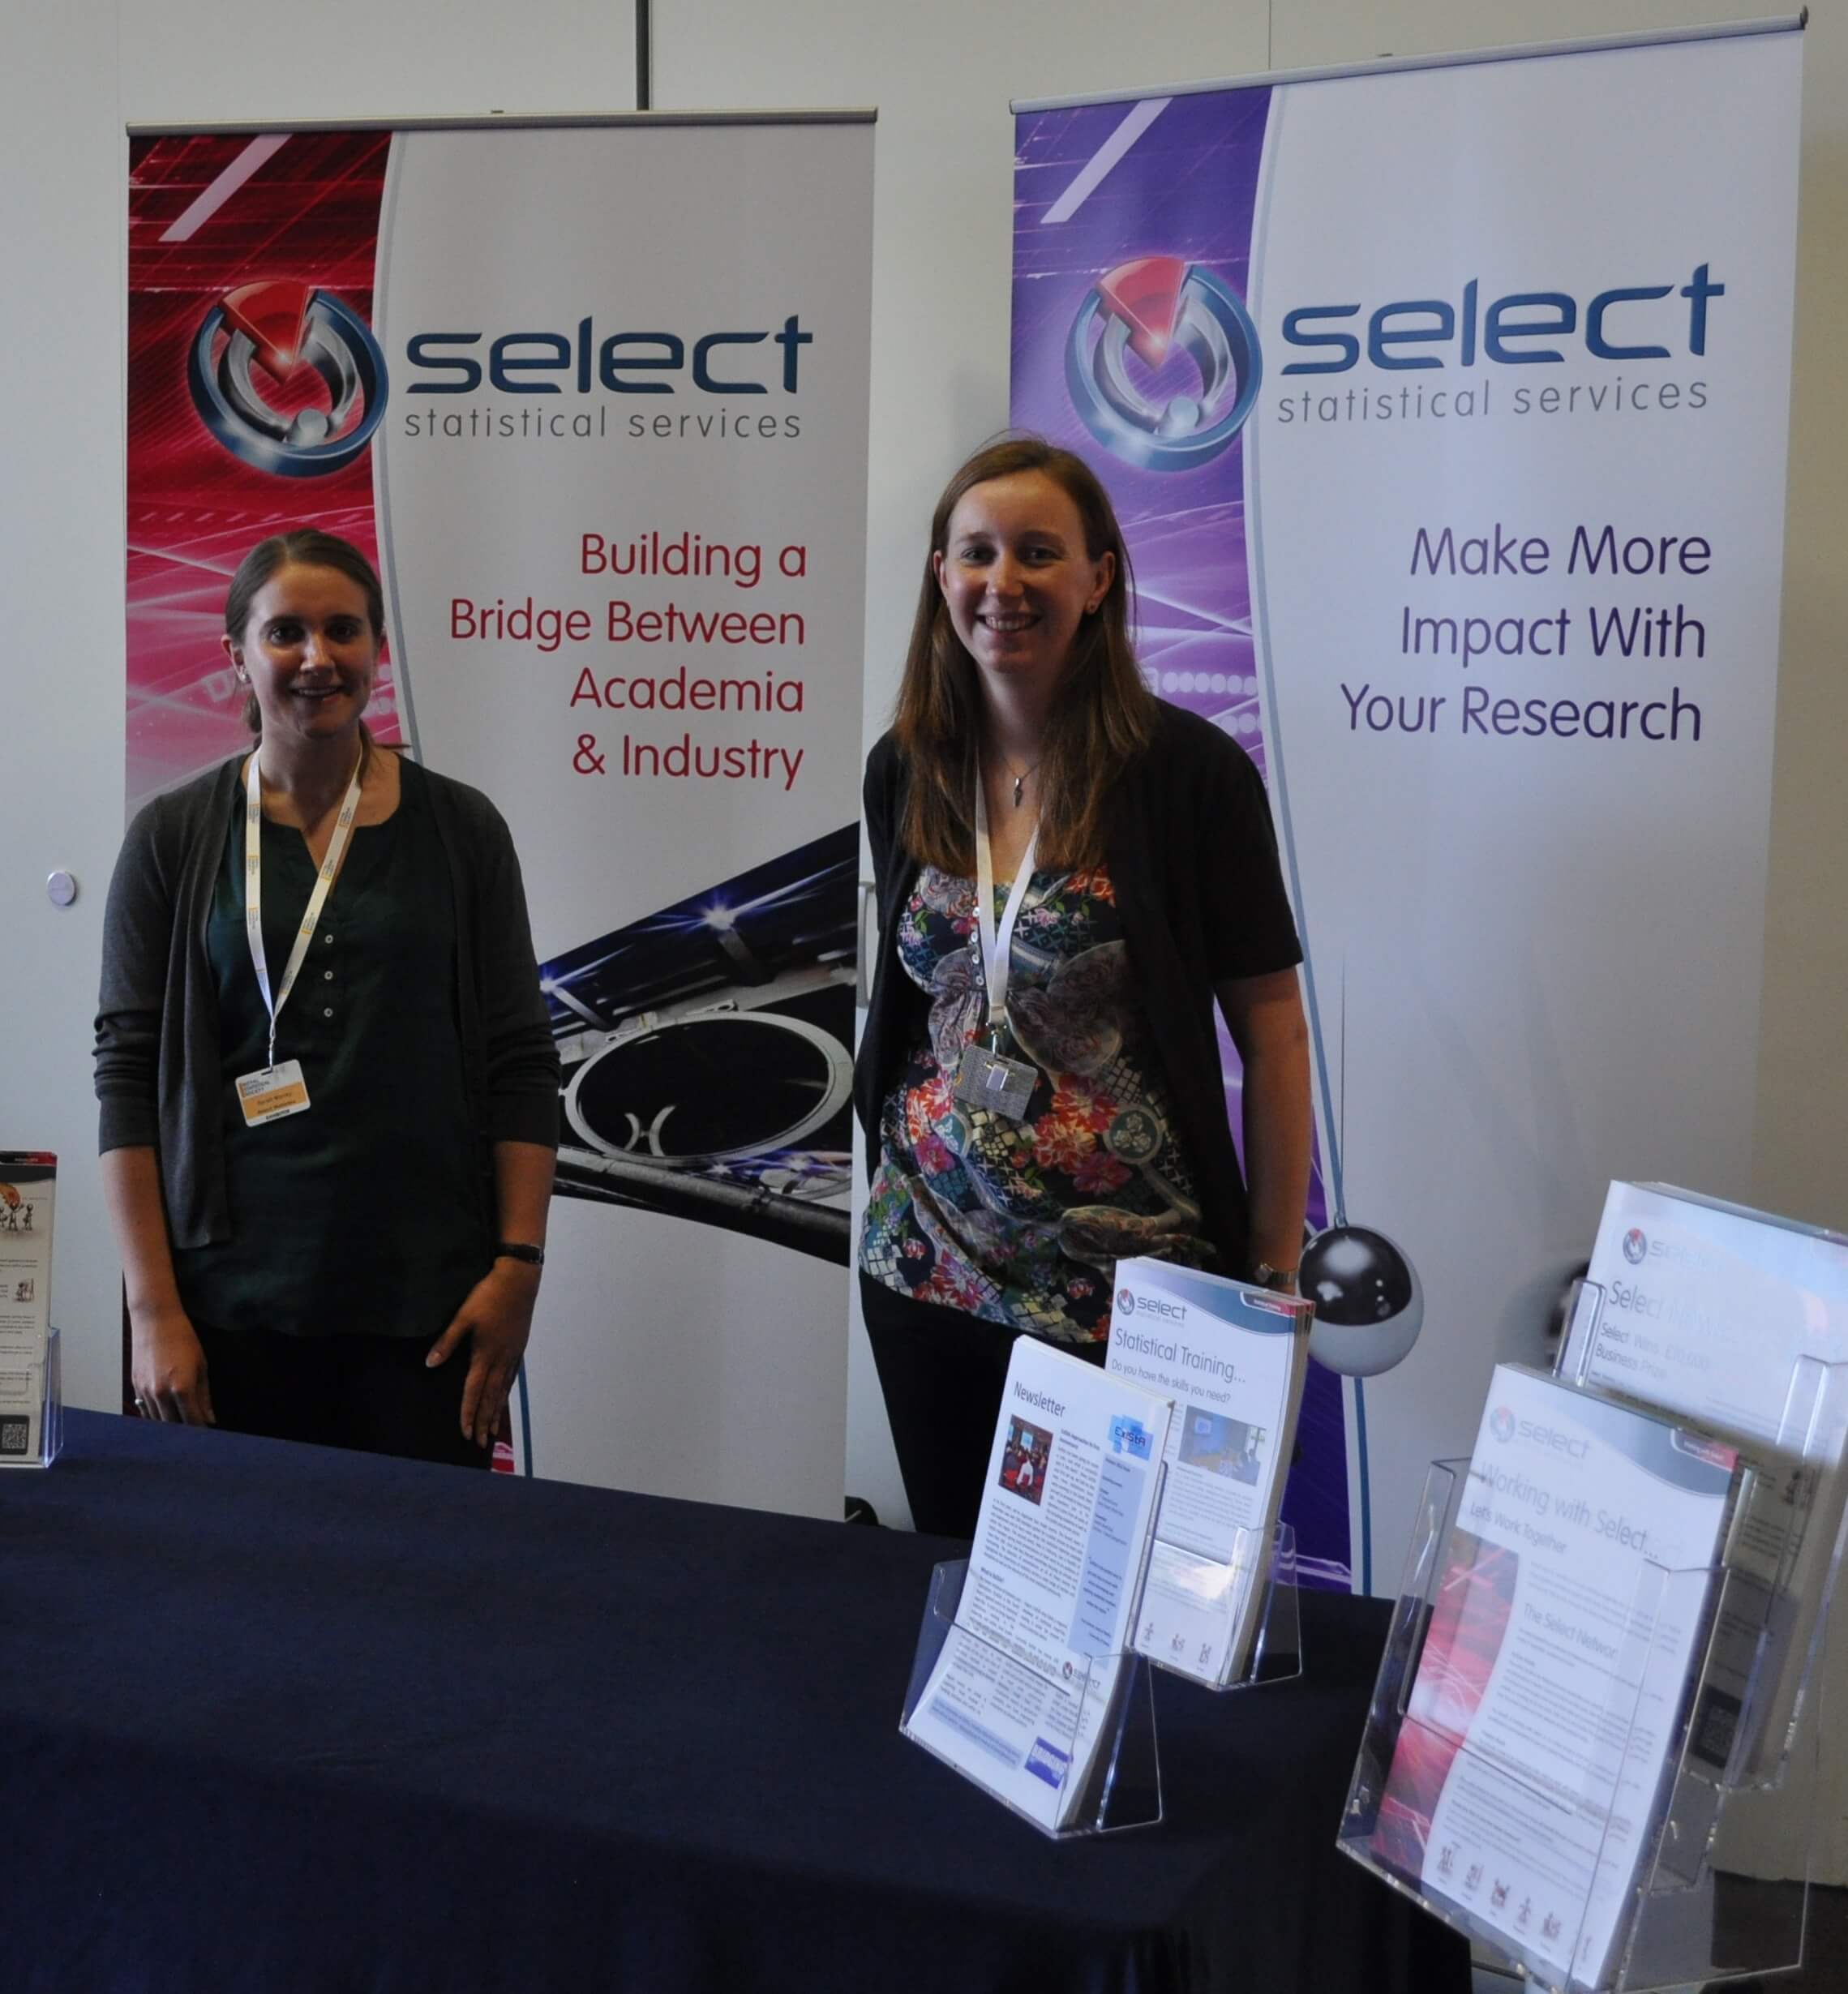 Select Statistics exhibitor's stand at the Royal Statistical Society conference 2012